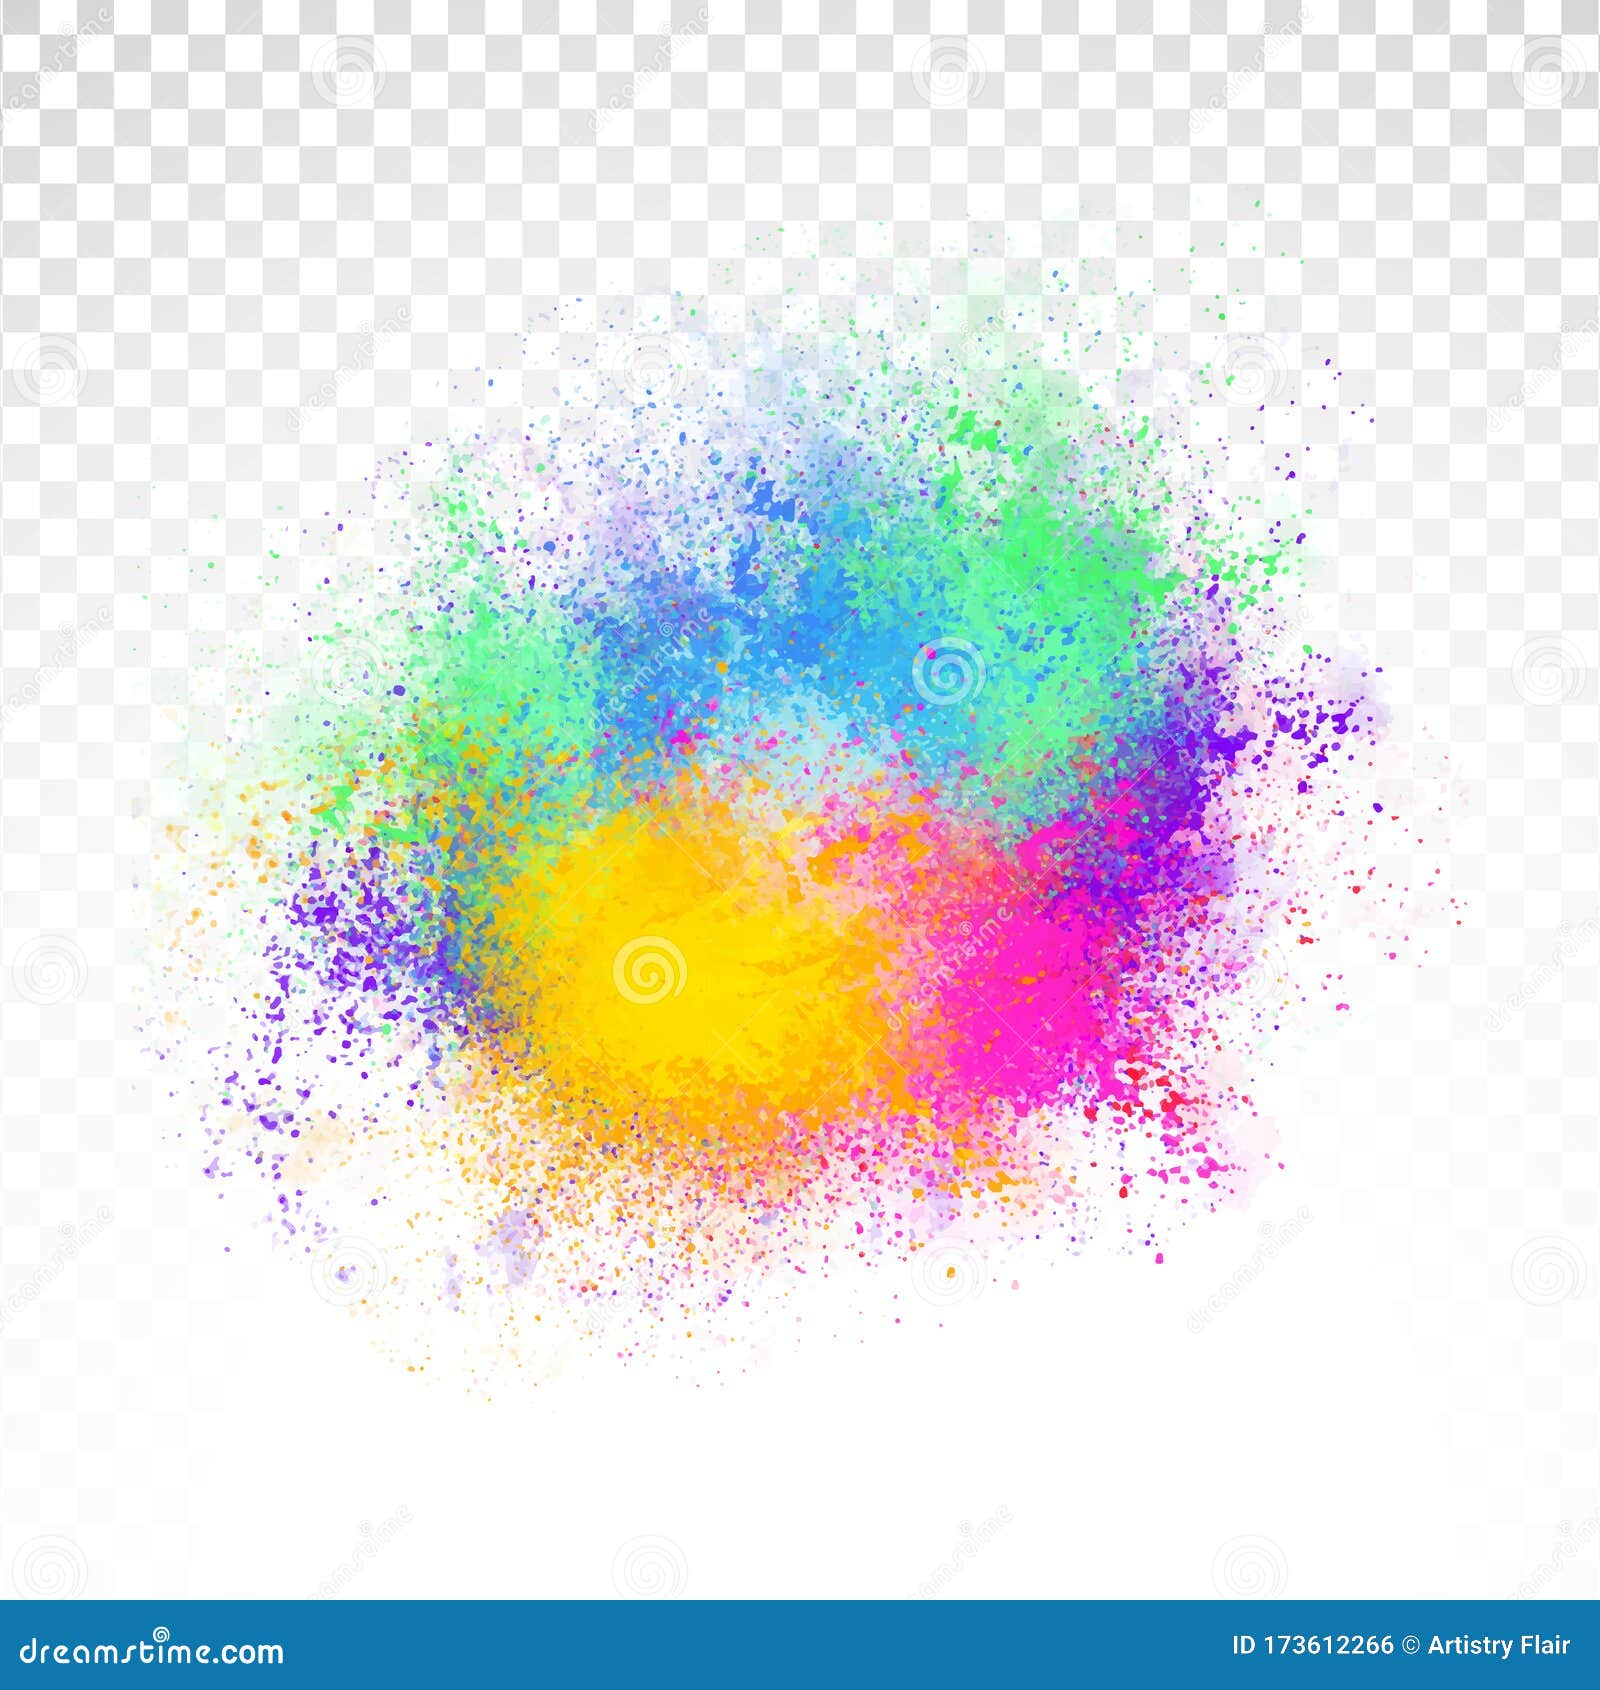 Abstract Rainbow Color Splash on PNG Background. Illustration of Festival  of Colors with Rainbow Color Powder Stock Vector - Illustration of color,  design: 173612266